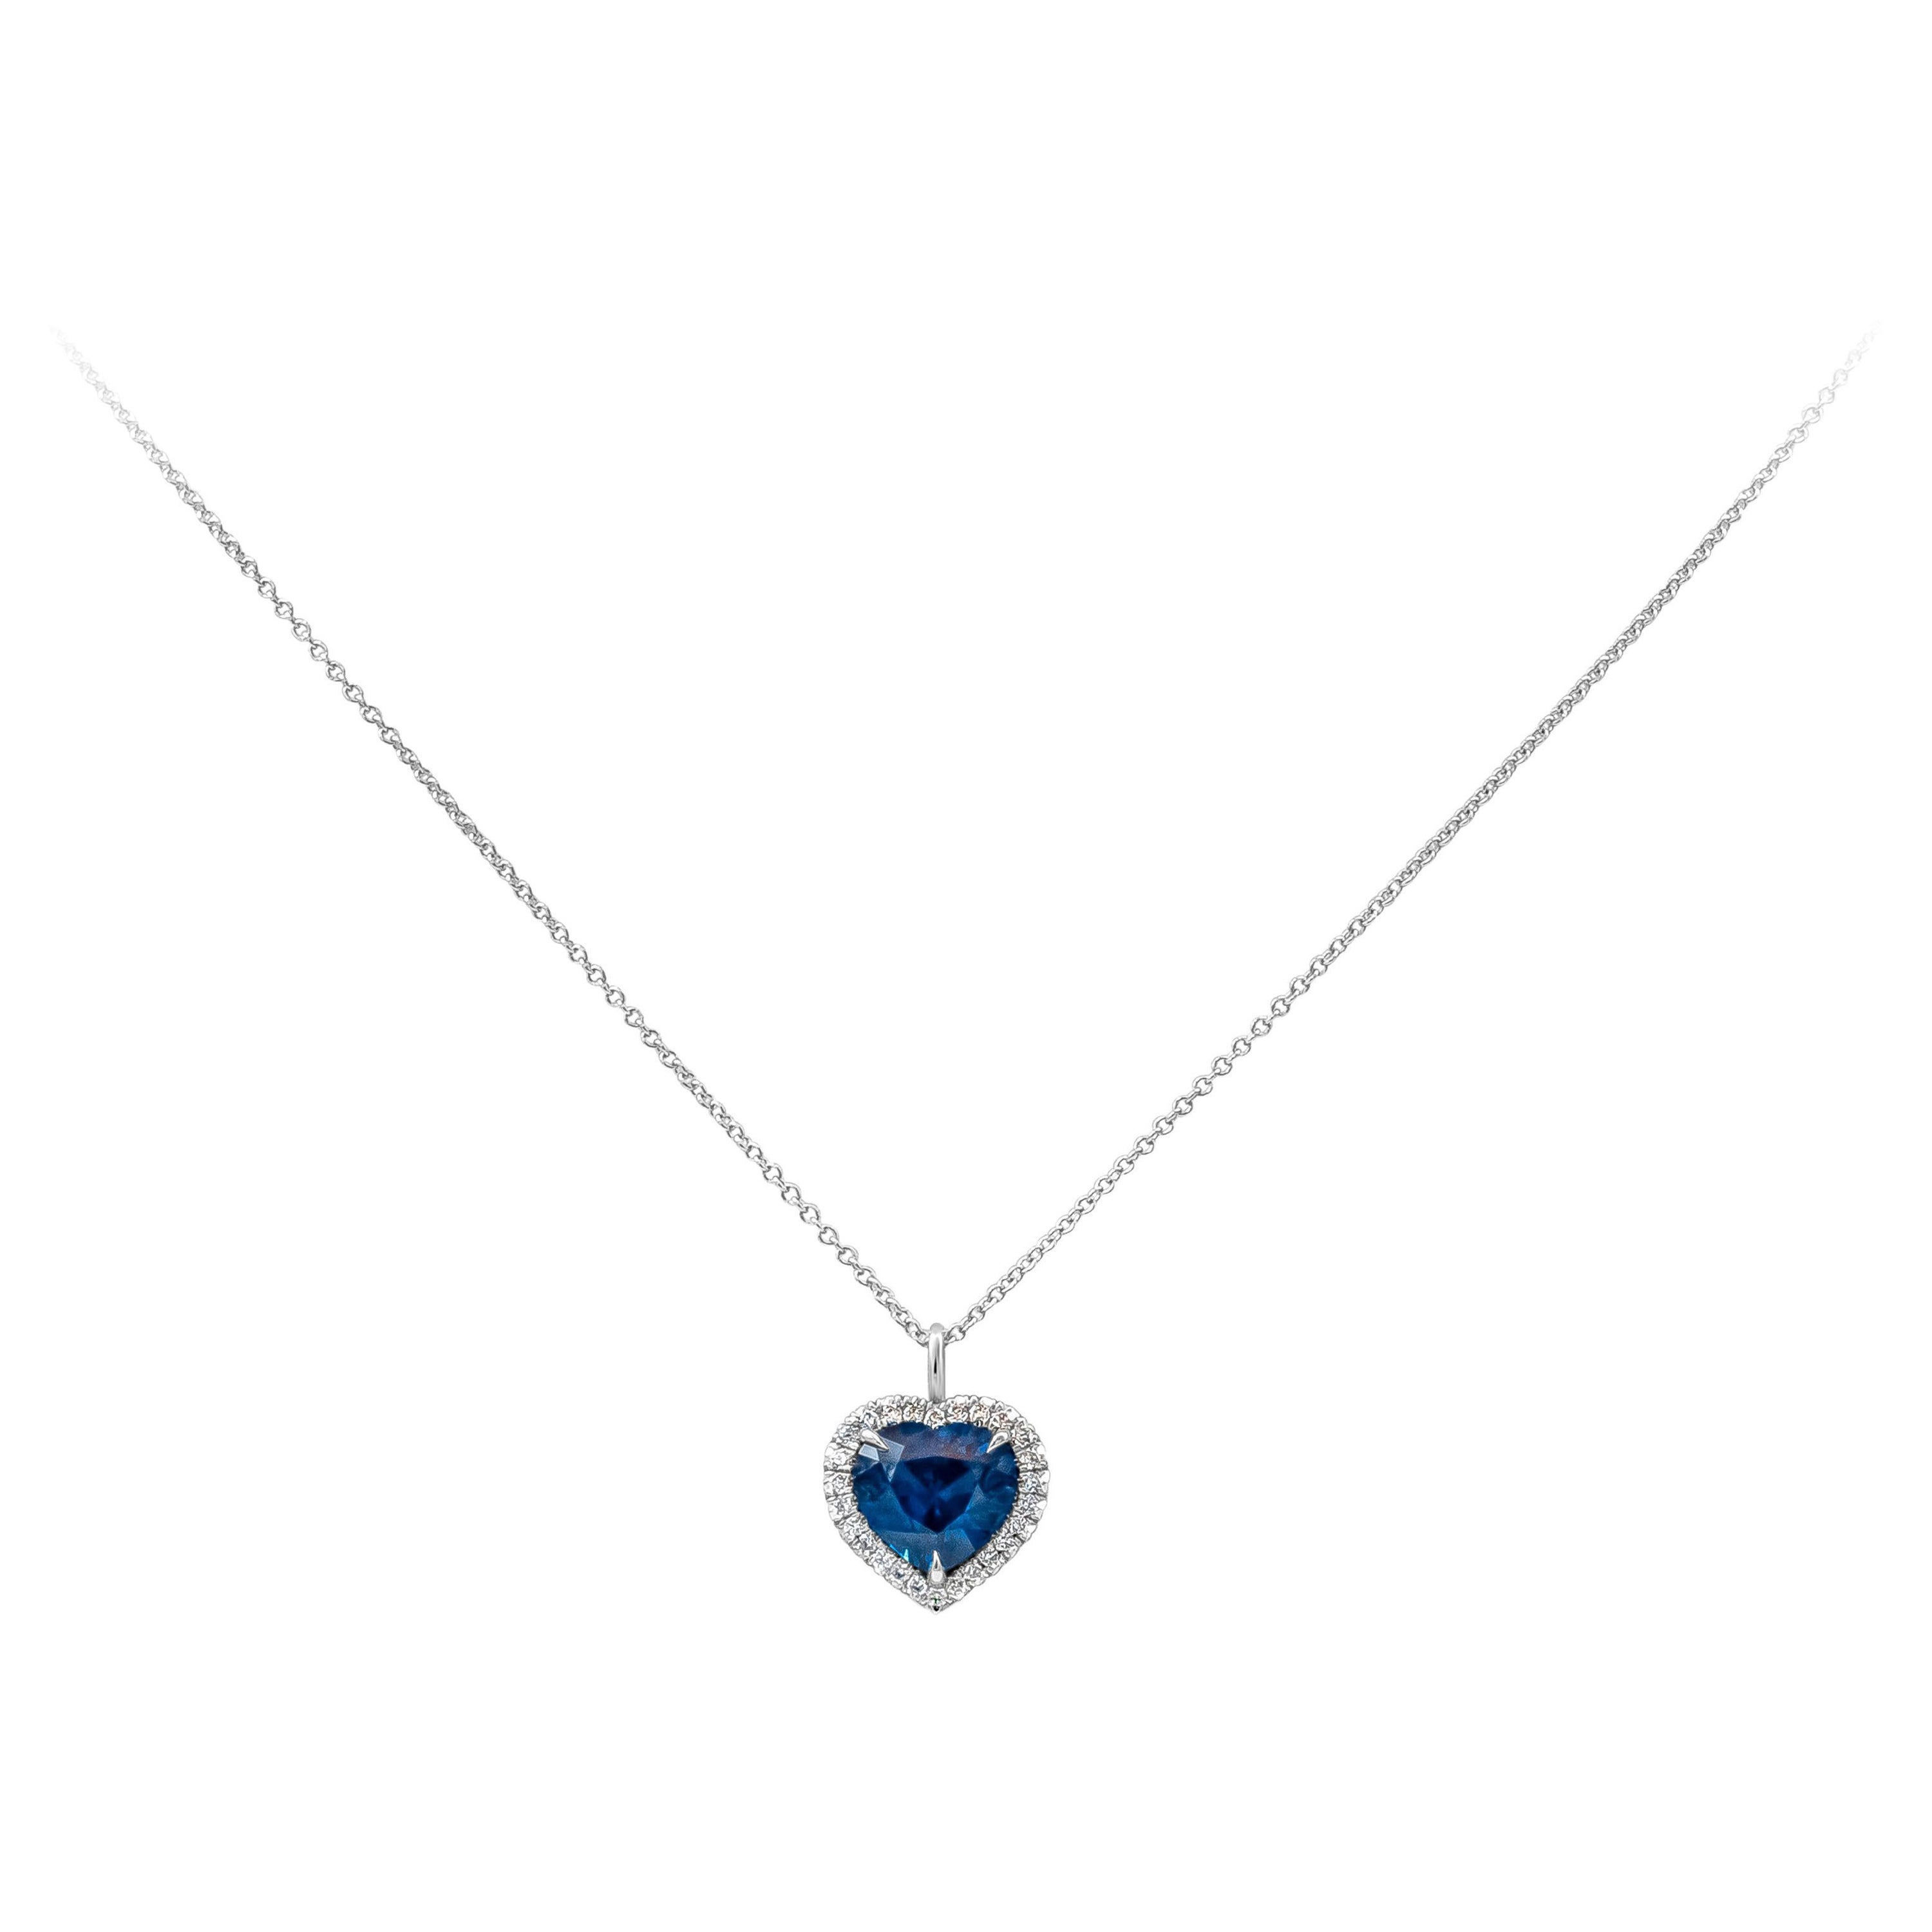 GIA Certified 2.58 Carat Heart Shape Blue Sapphire with Diamond Pendant Necklace For Sale